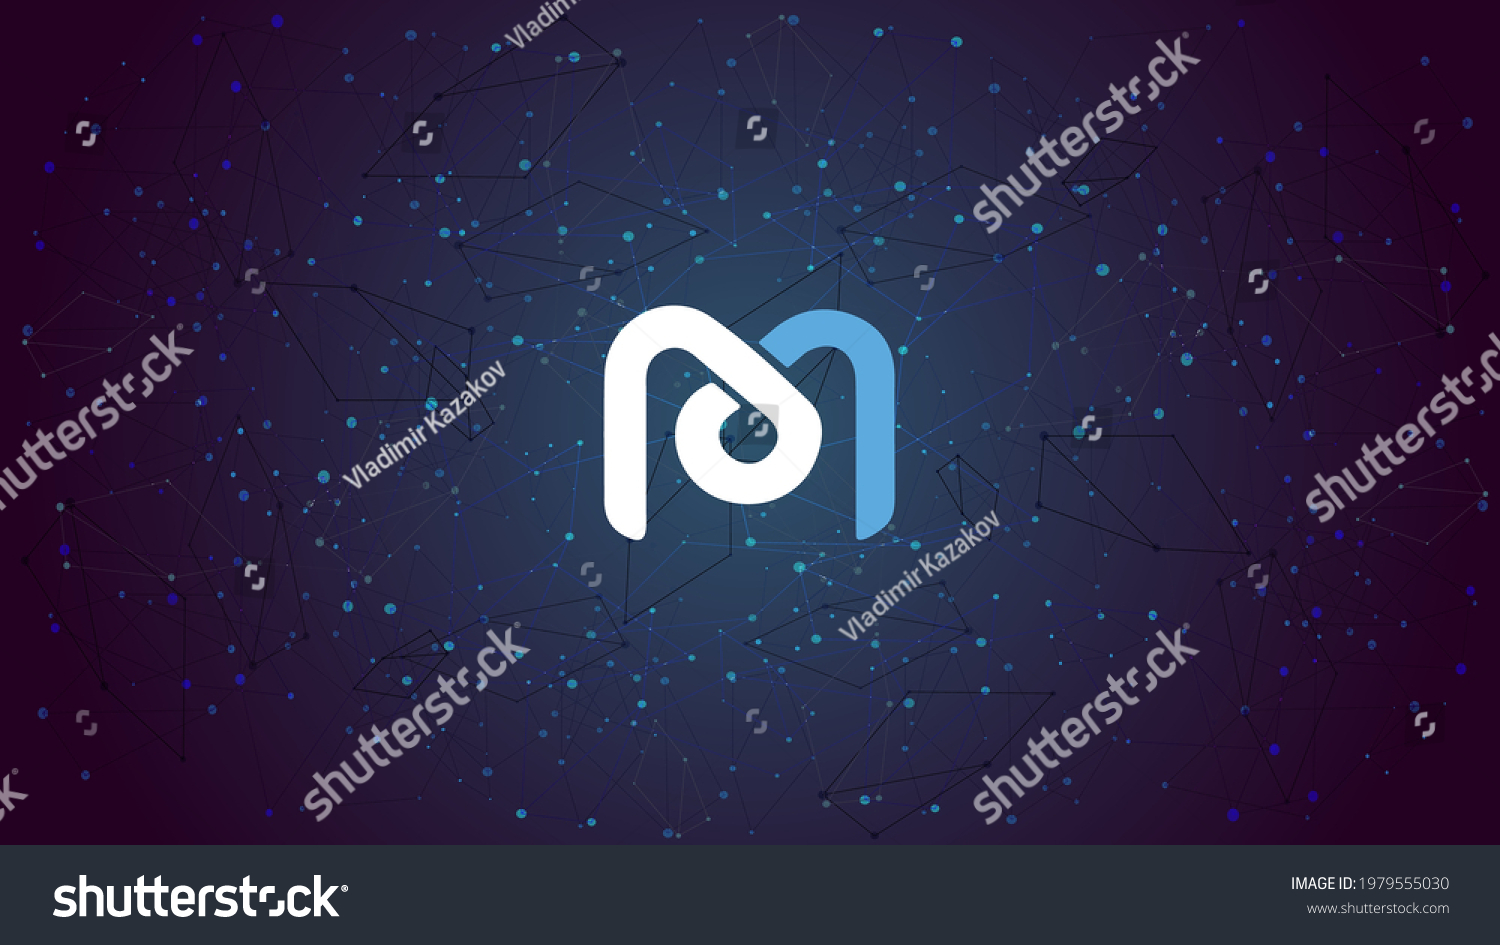 SVG of Mdex MDX token symbol of the DeFi project cryptocurrency theme on blue polygonal background. Cryptocurrency coin logo icon. Decentralized finance programs. Vector illustration. svg